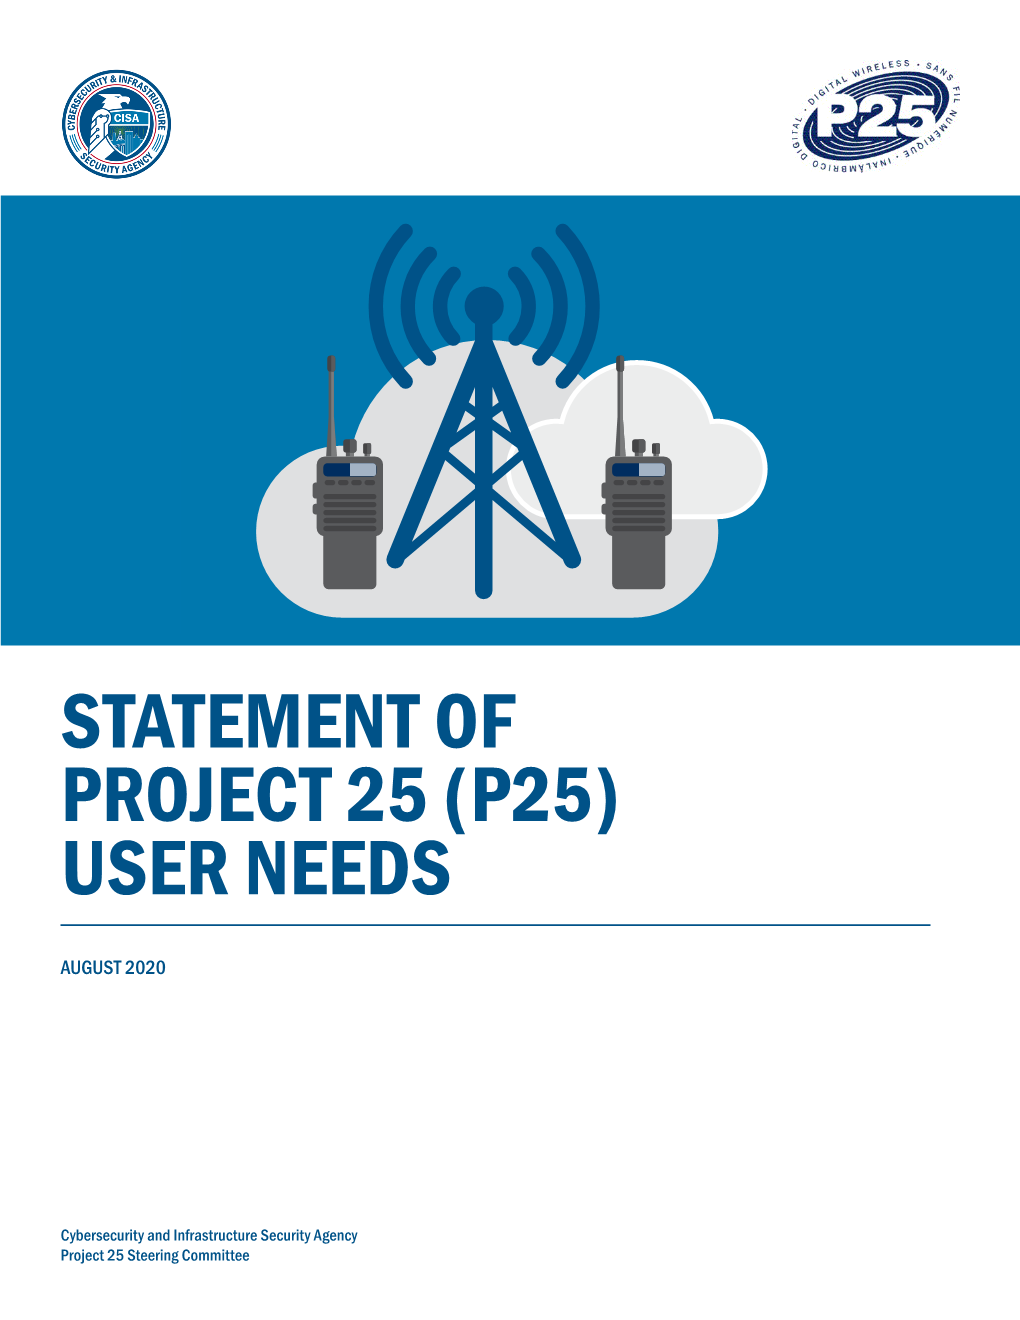 Statement of Project 25 (P25) User Needs, October 2020